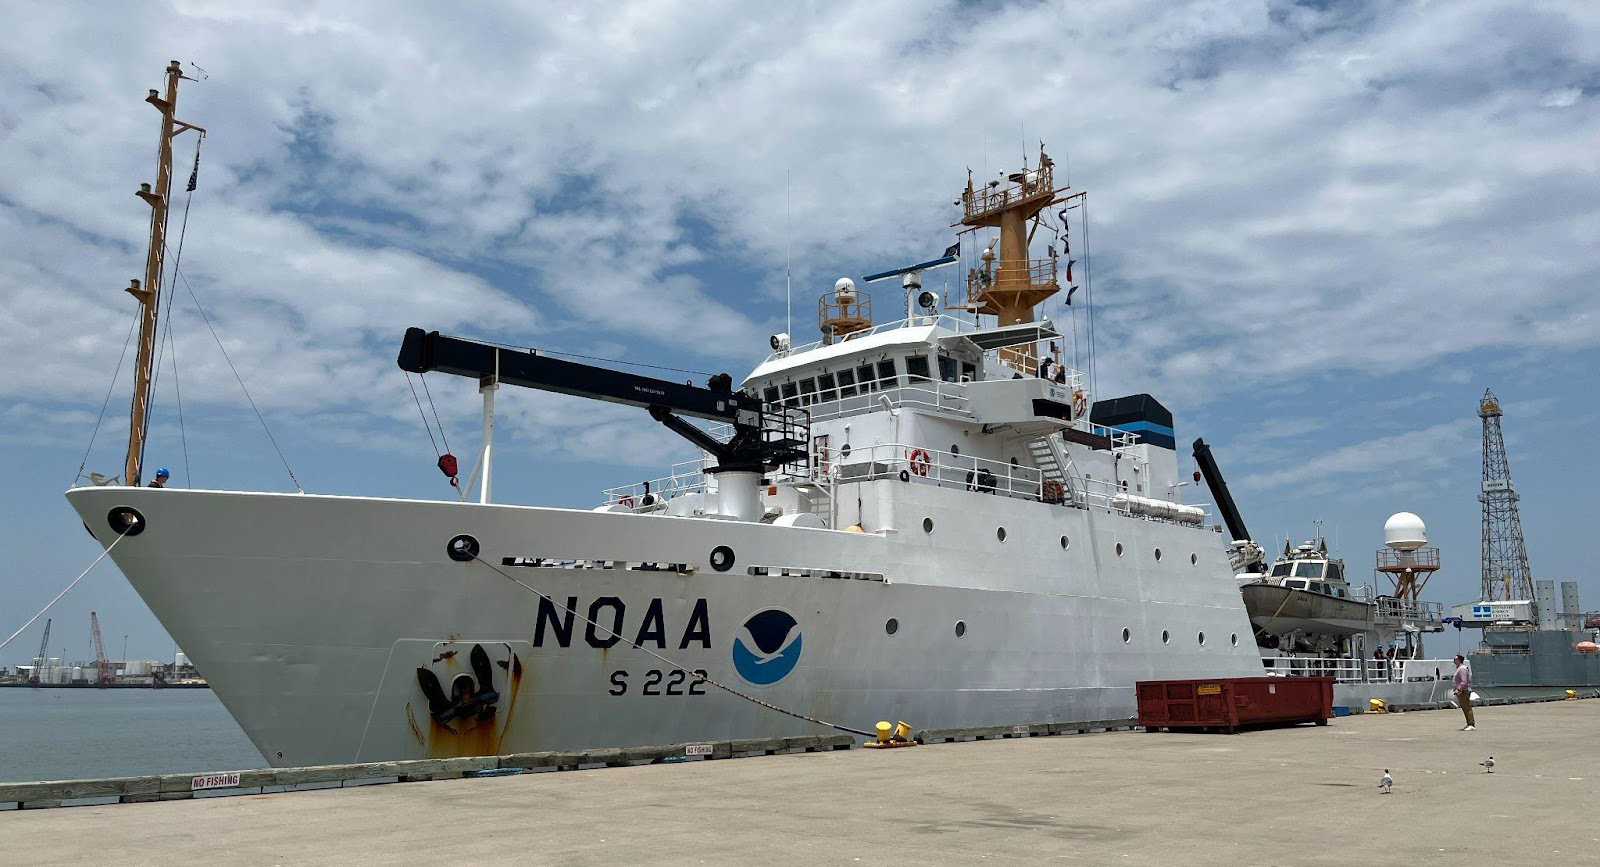 NOAA Ship Thomas Jefferson tied up at the Port of Galveston before departing for its survey leg.